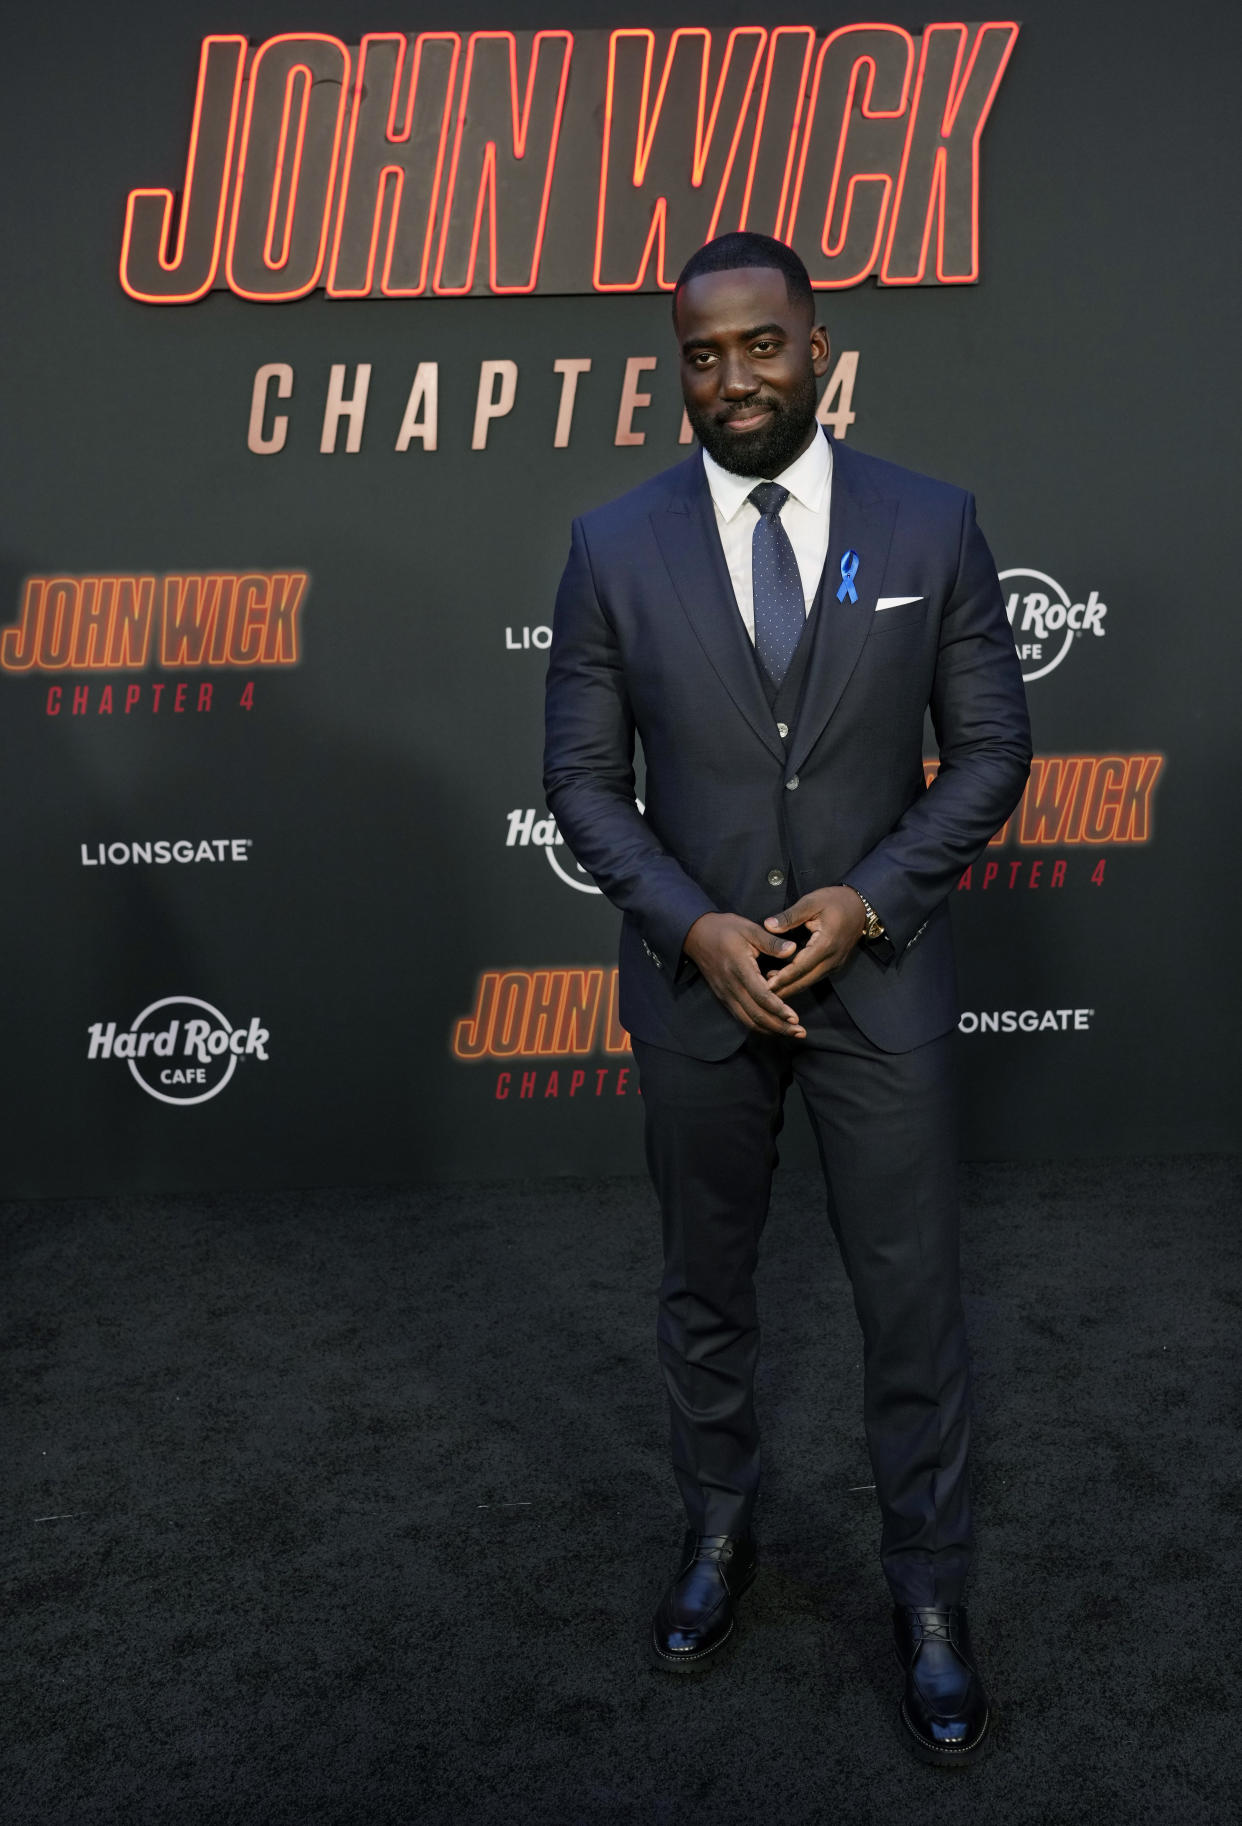 Shamier Anderson, a cast member in "John Wick: Chapter 4," poses at the premiere of the film, Monday, March 20, 2023, at the TCL Chinese Theatre in Los Angeles. (AP Photo/Chris Pizzello)